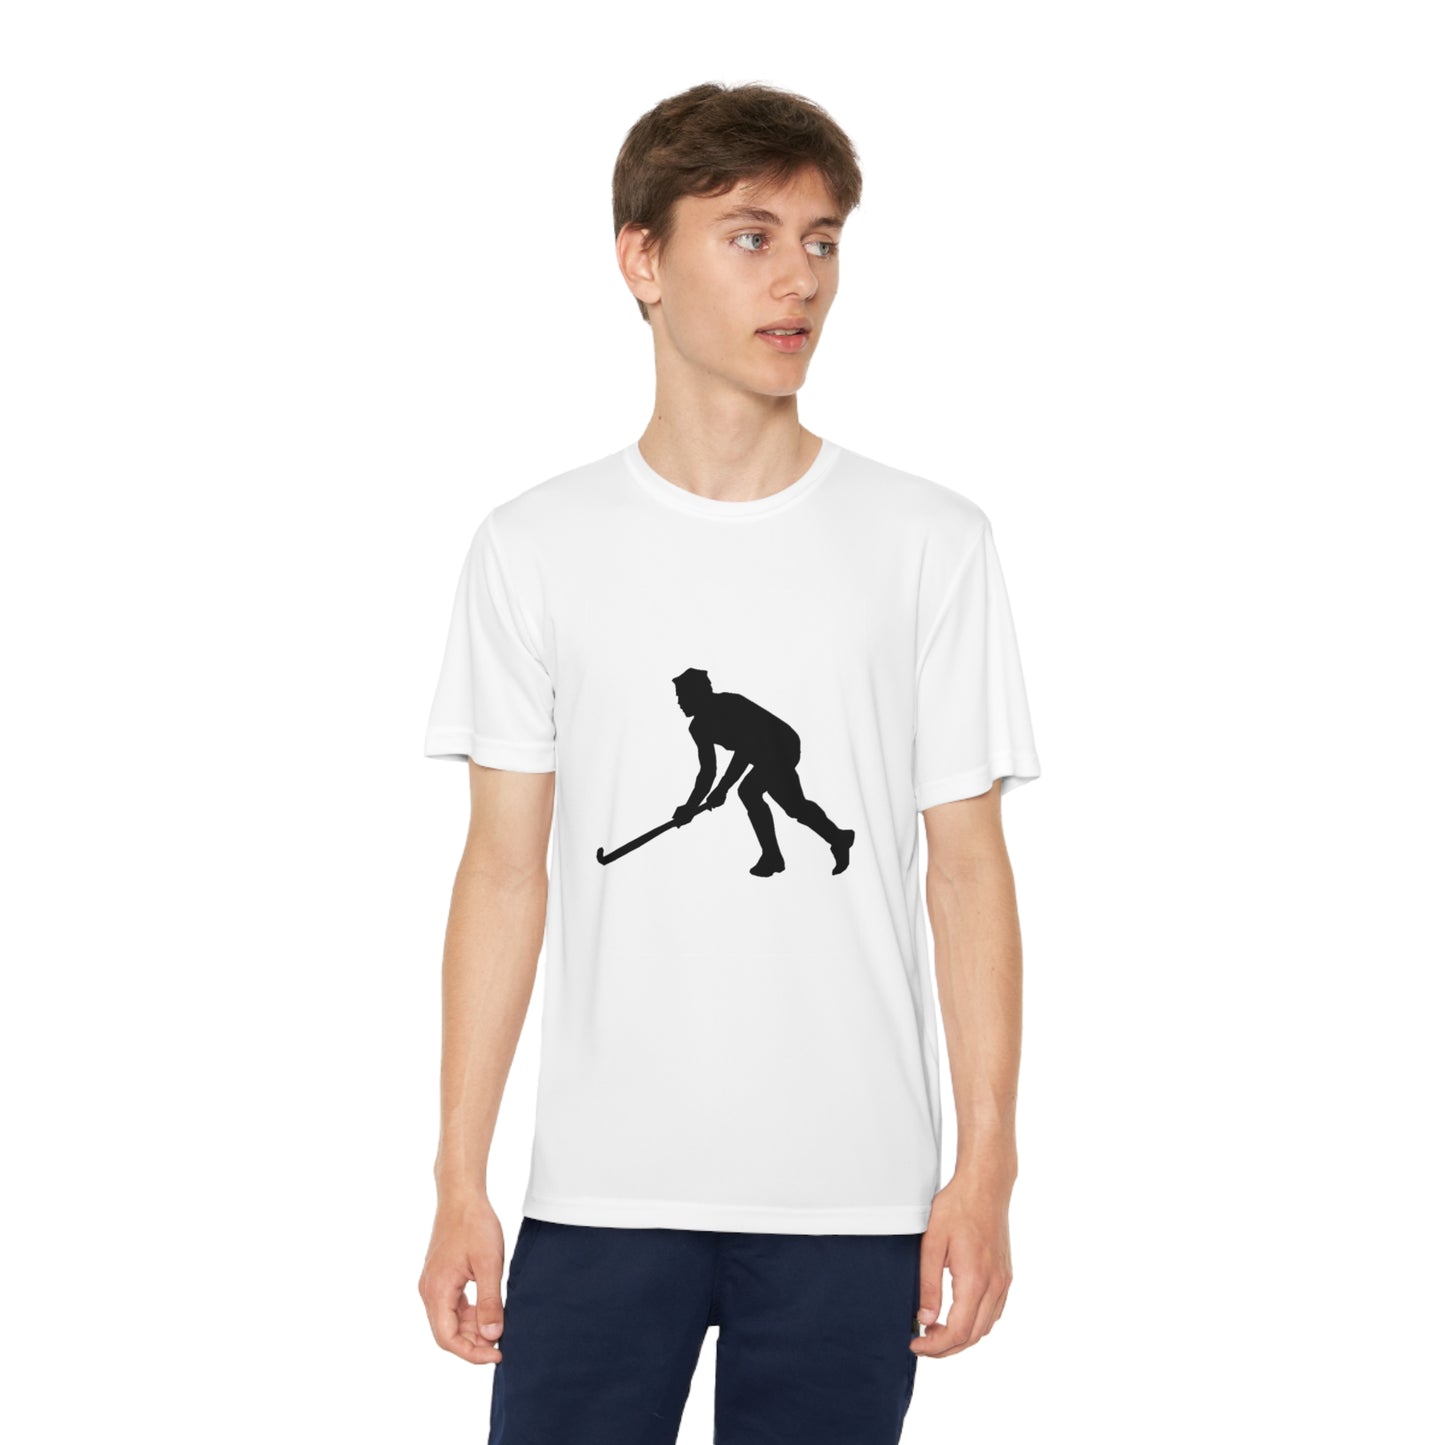 Youth Competitor Tee #1: Hockey